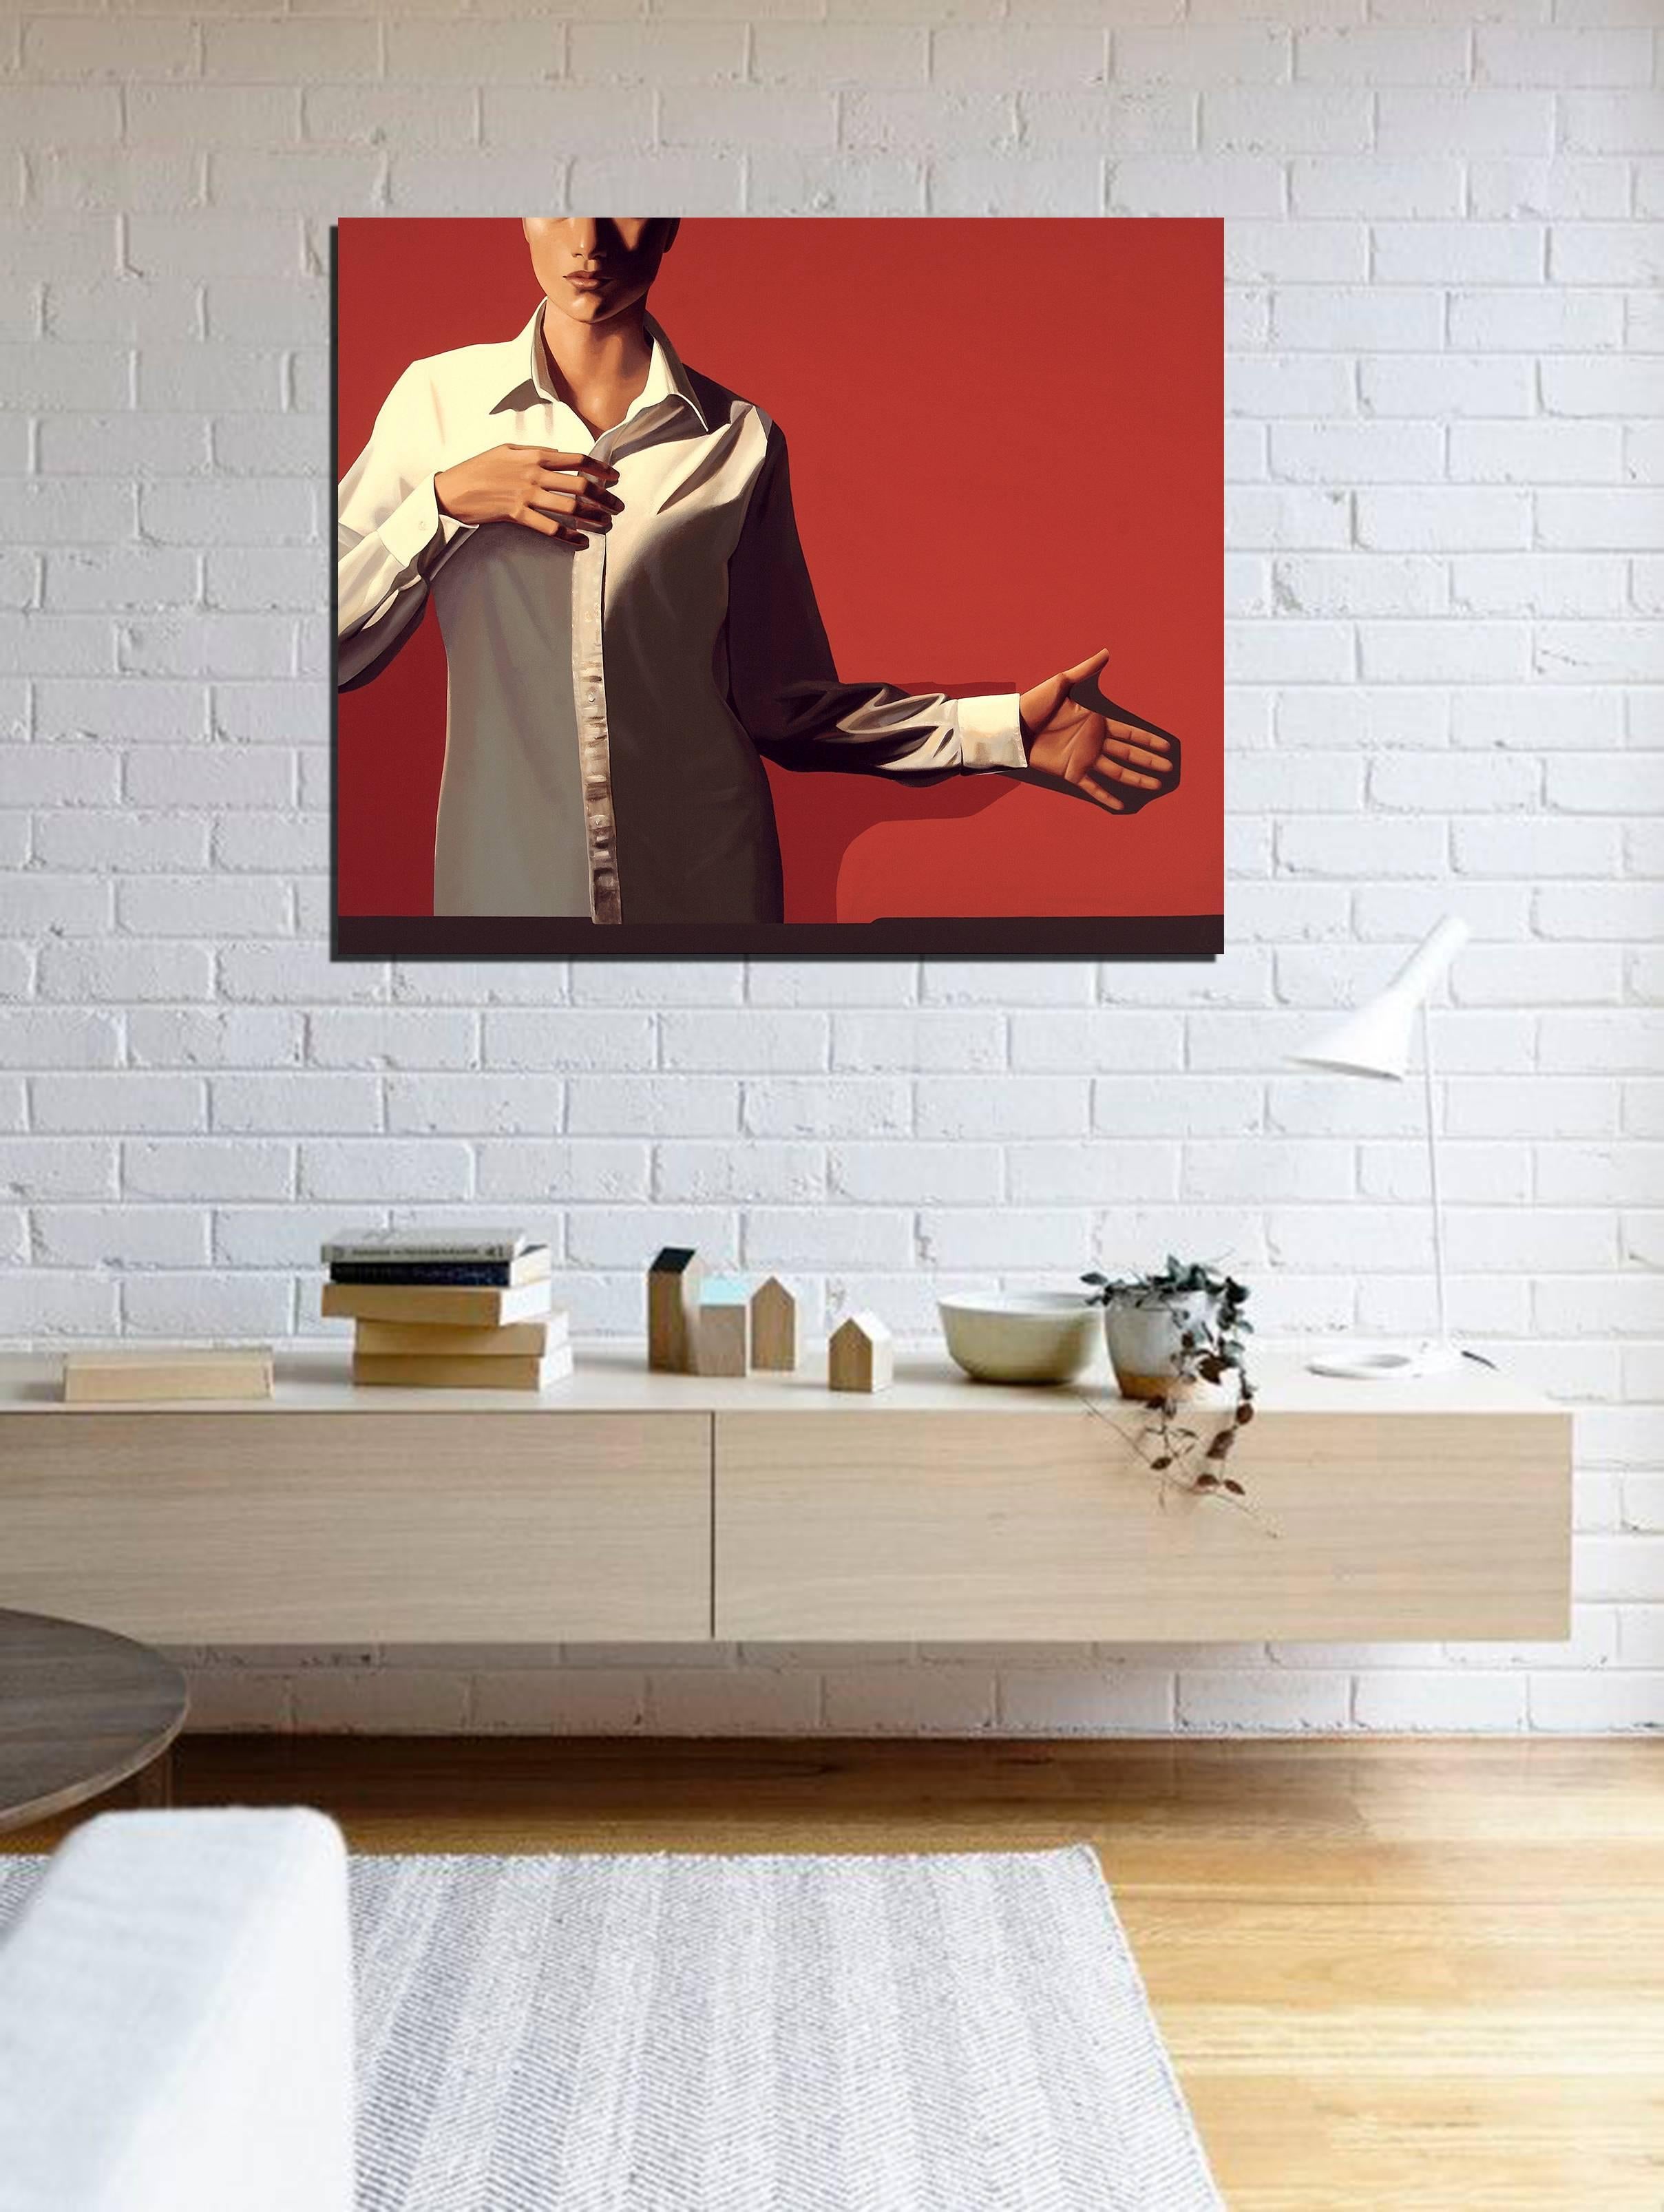 Offering, acrylic on canvas, modern realism painting from white shirt series - Painting by Erin Cone